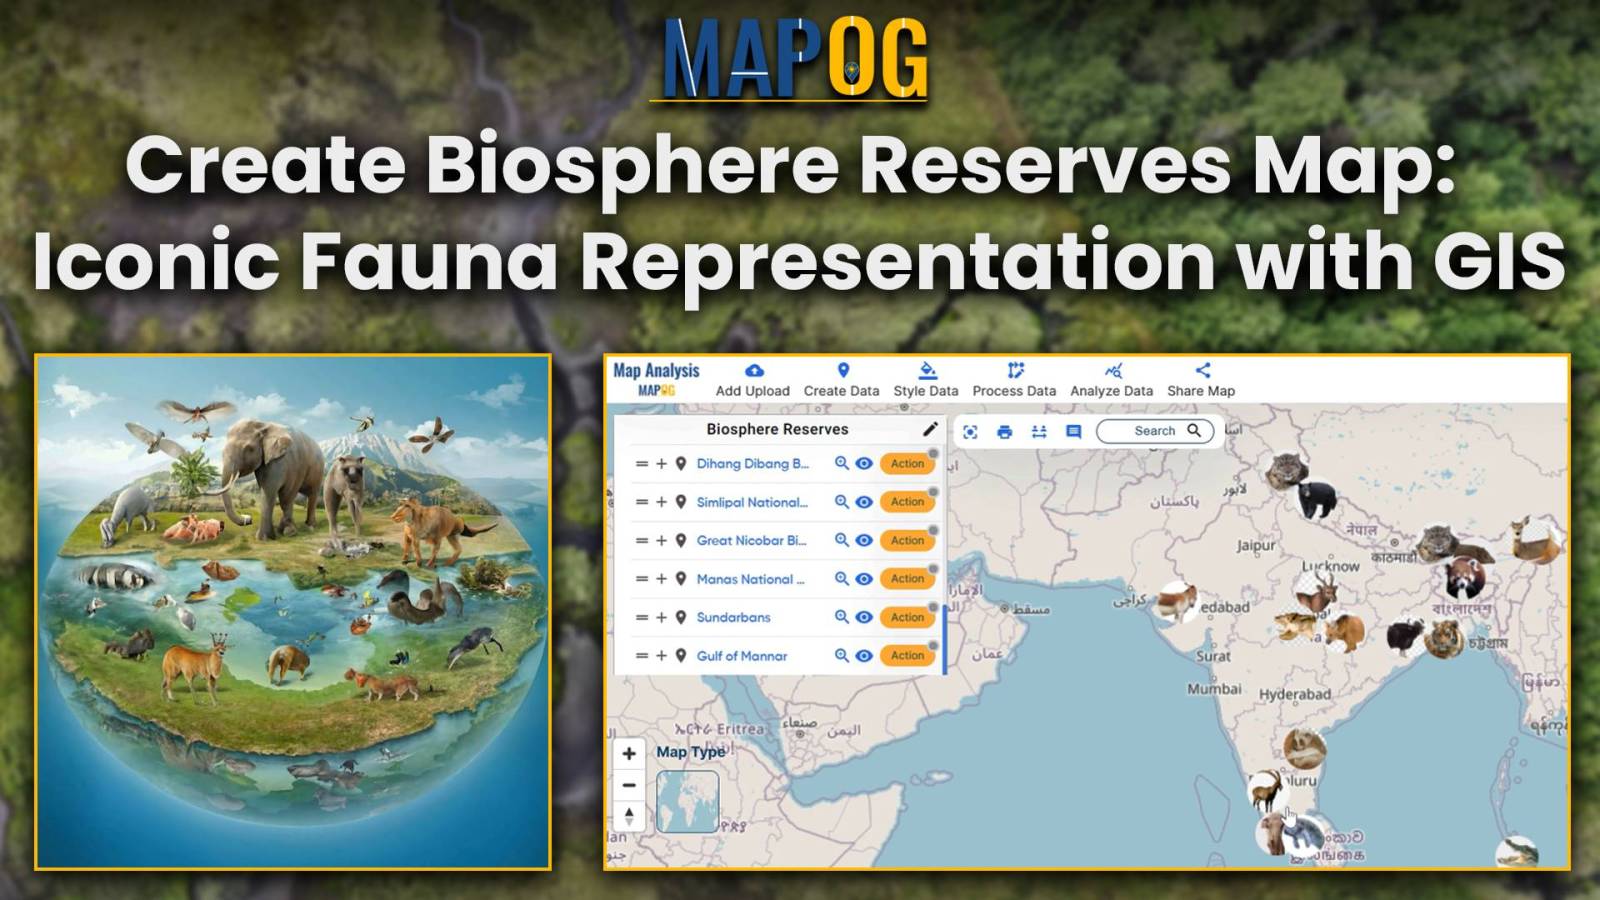 Create Biosphere Reserves Map: Iconic Fauna Representation with GIS